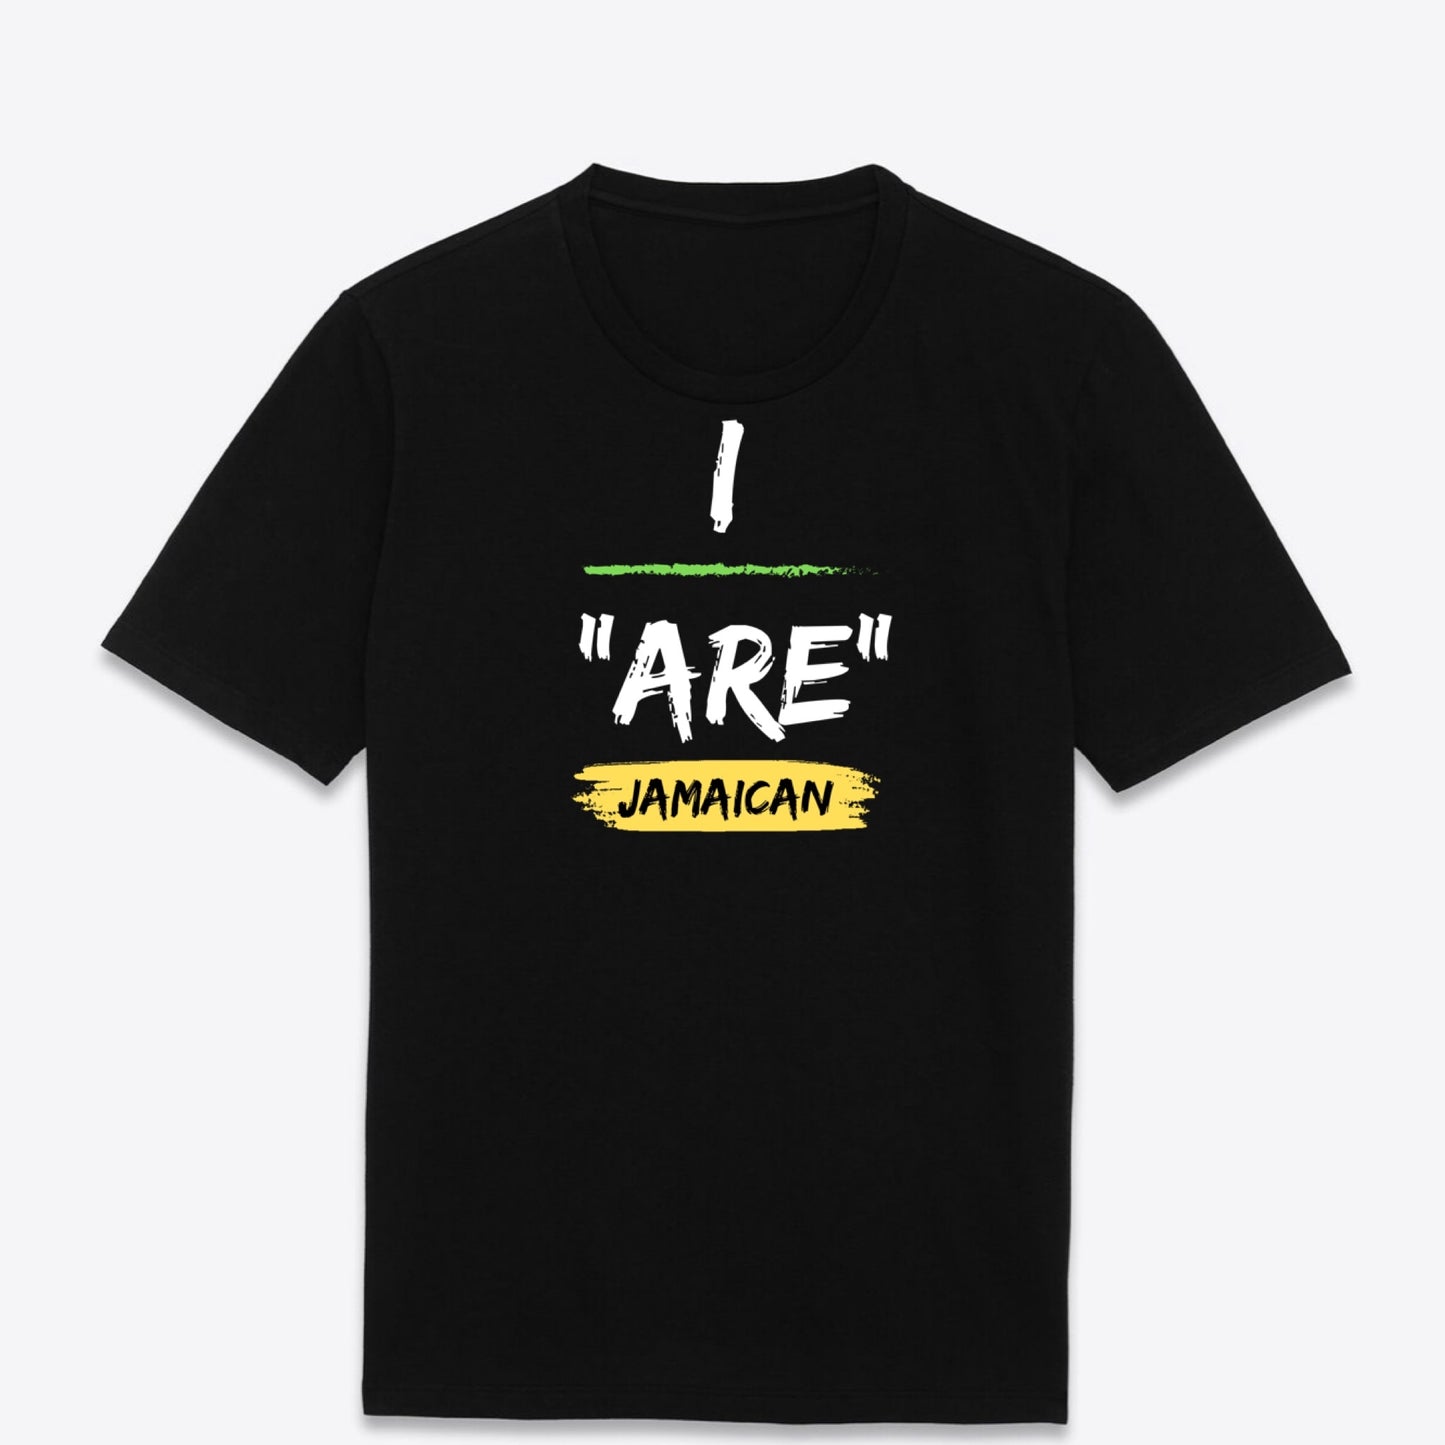 I “are” Jamaican t-shirt